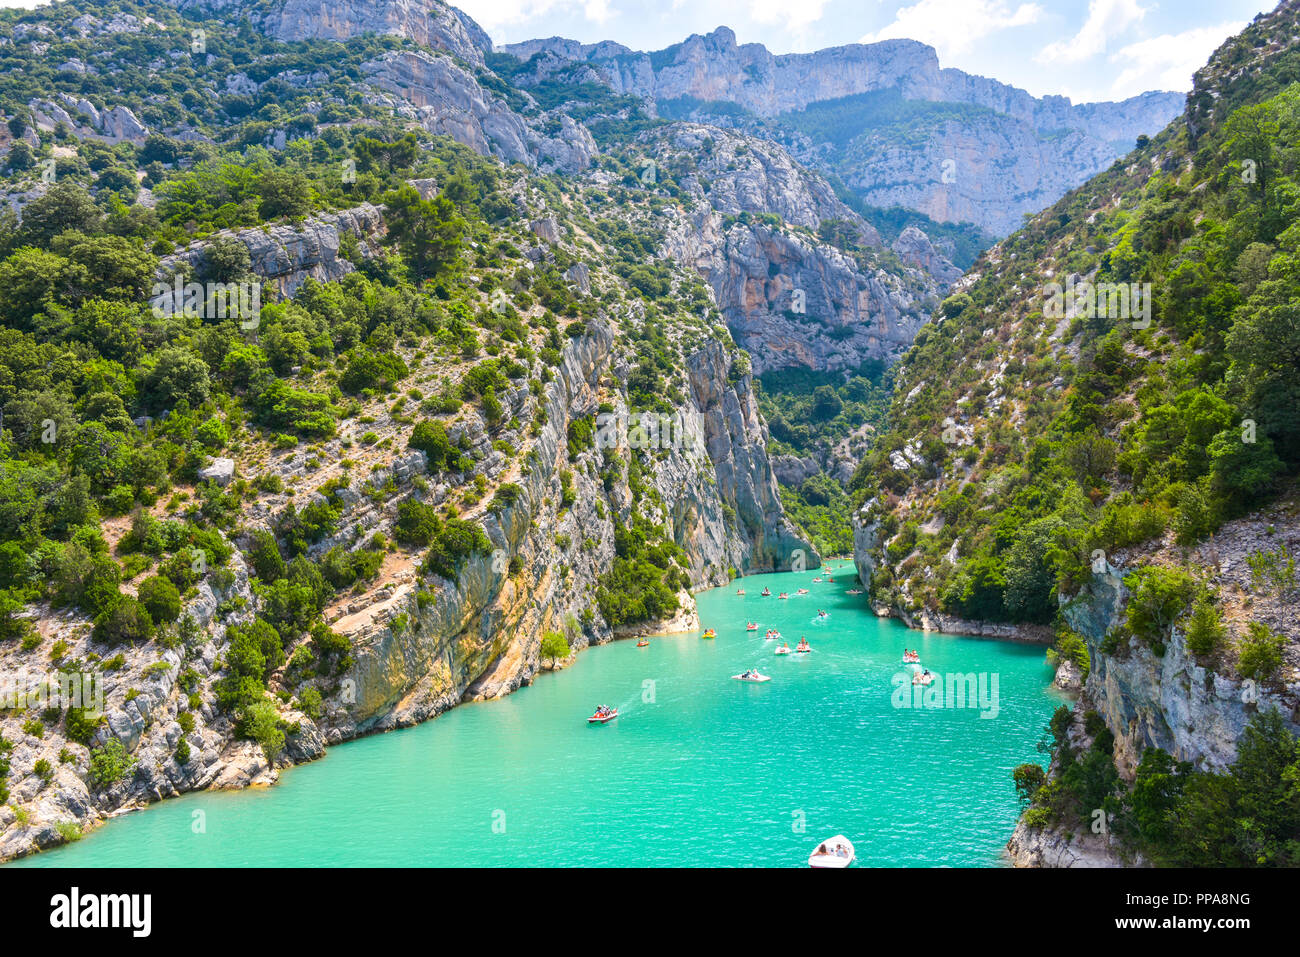 entrance to the Verdon Gorge with cliffy rocks at lake of Sainte-Croix, Provence, France, near Moustiers-Sainte-Marie Stock Photo